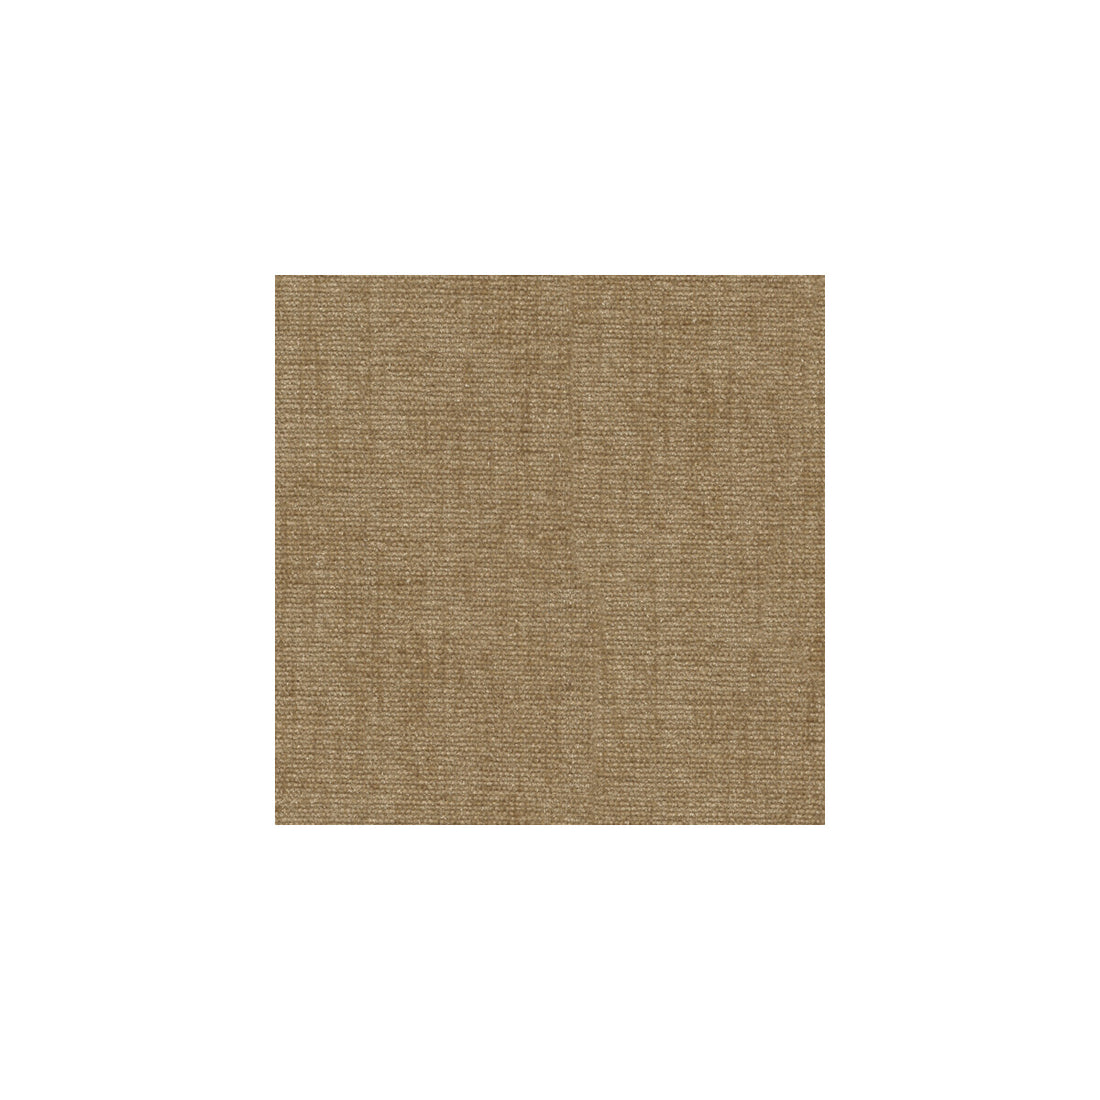 Stanton Chenille fabric in melba color - pattern 32148.116.0 - by Kravet Contract